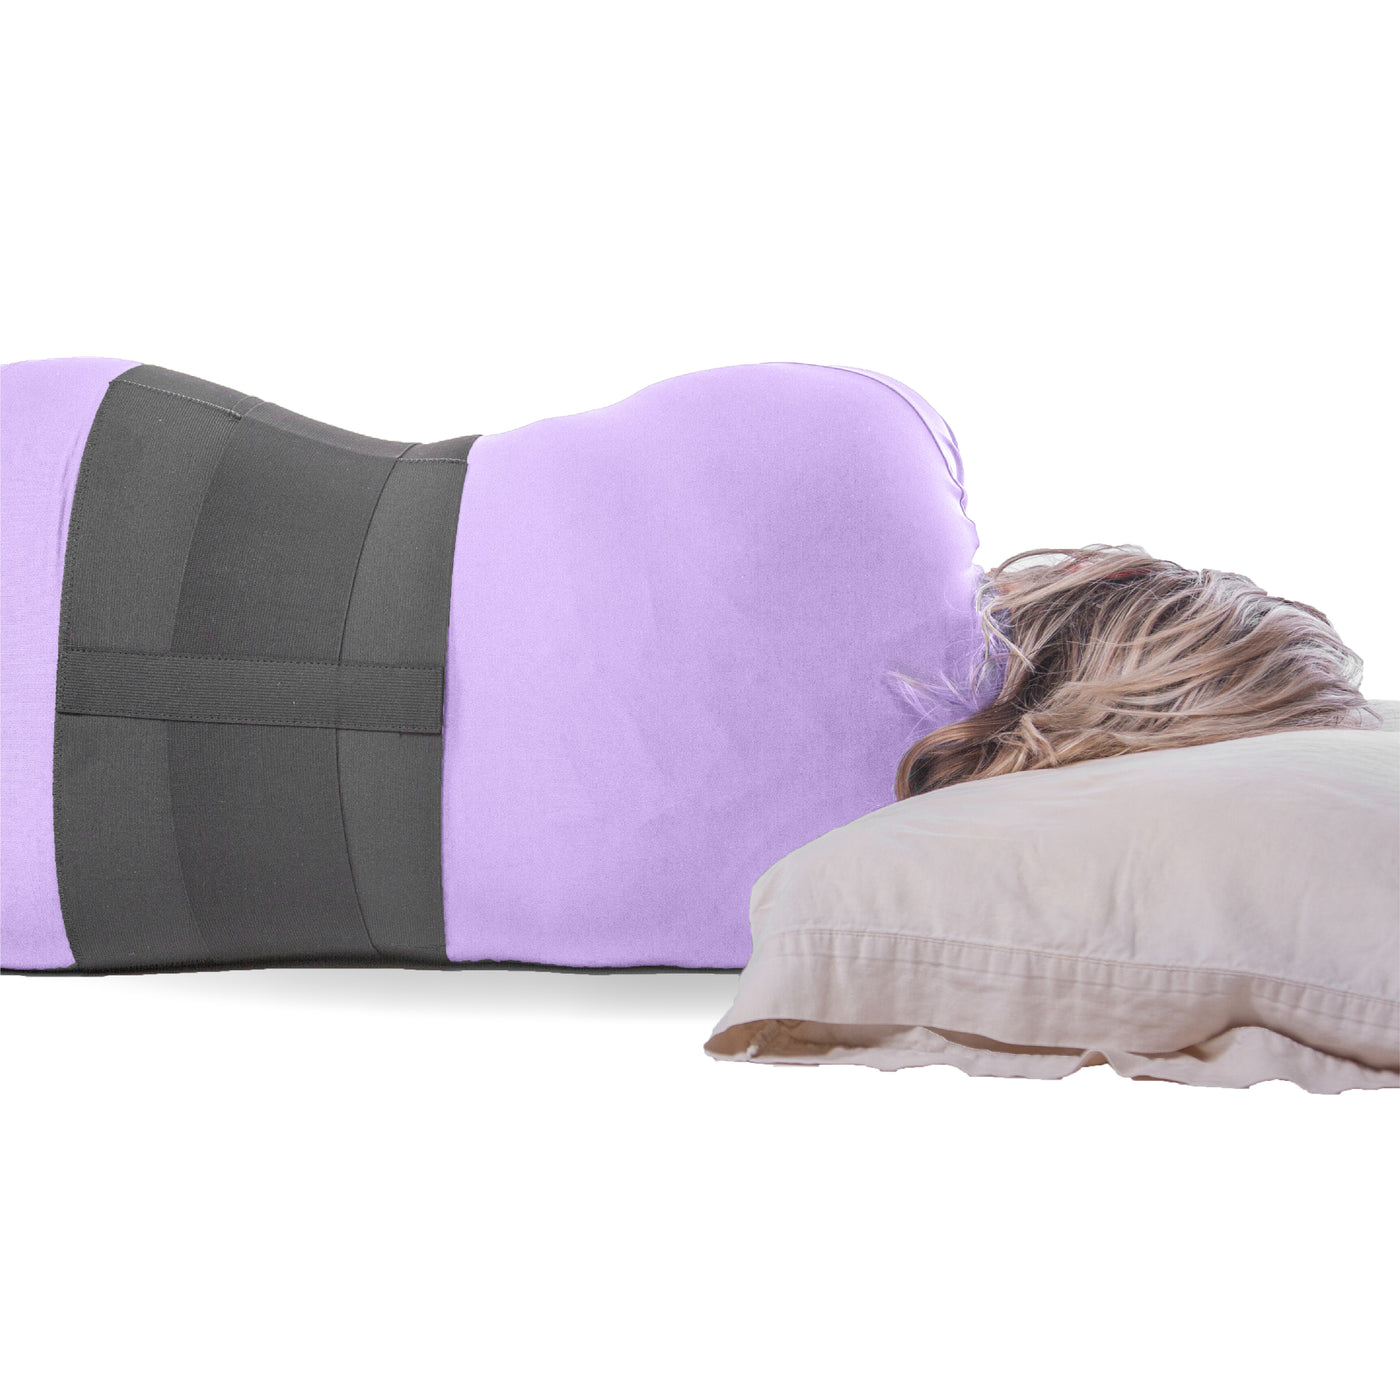 The plus size back brace for sleeping fits average to obese back injuries through daily activity or at night